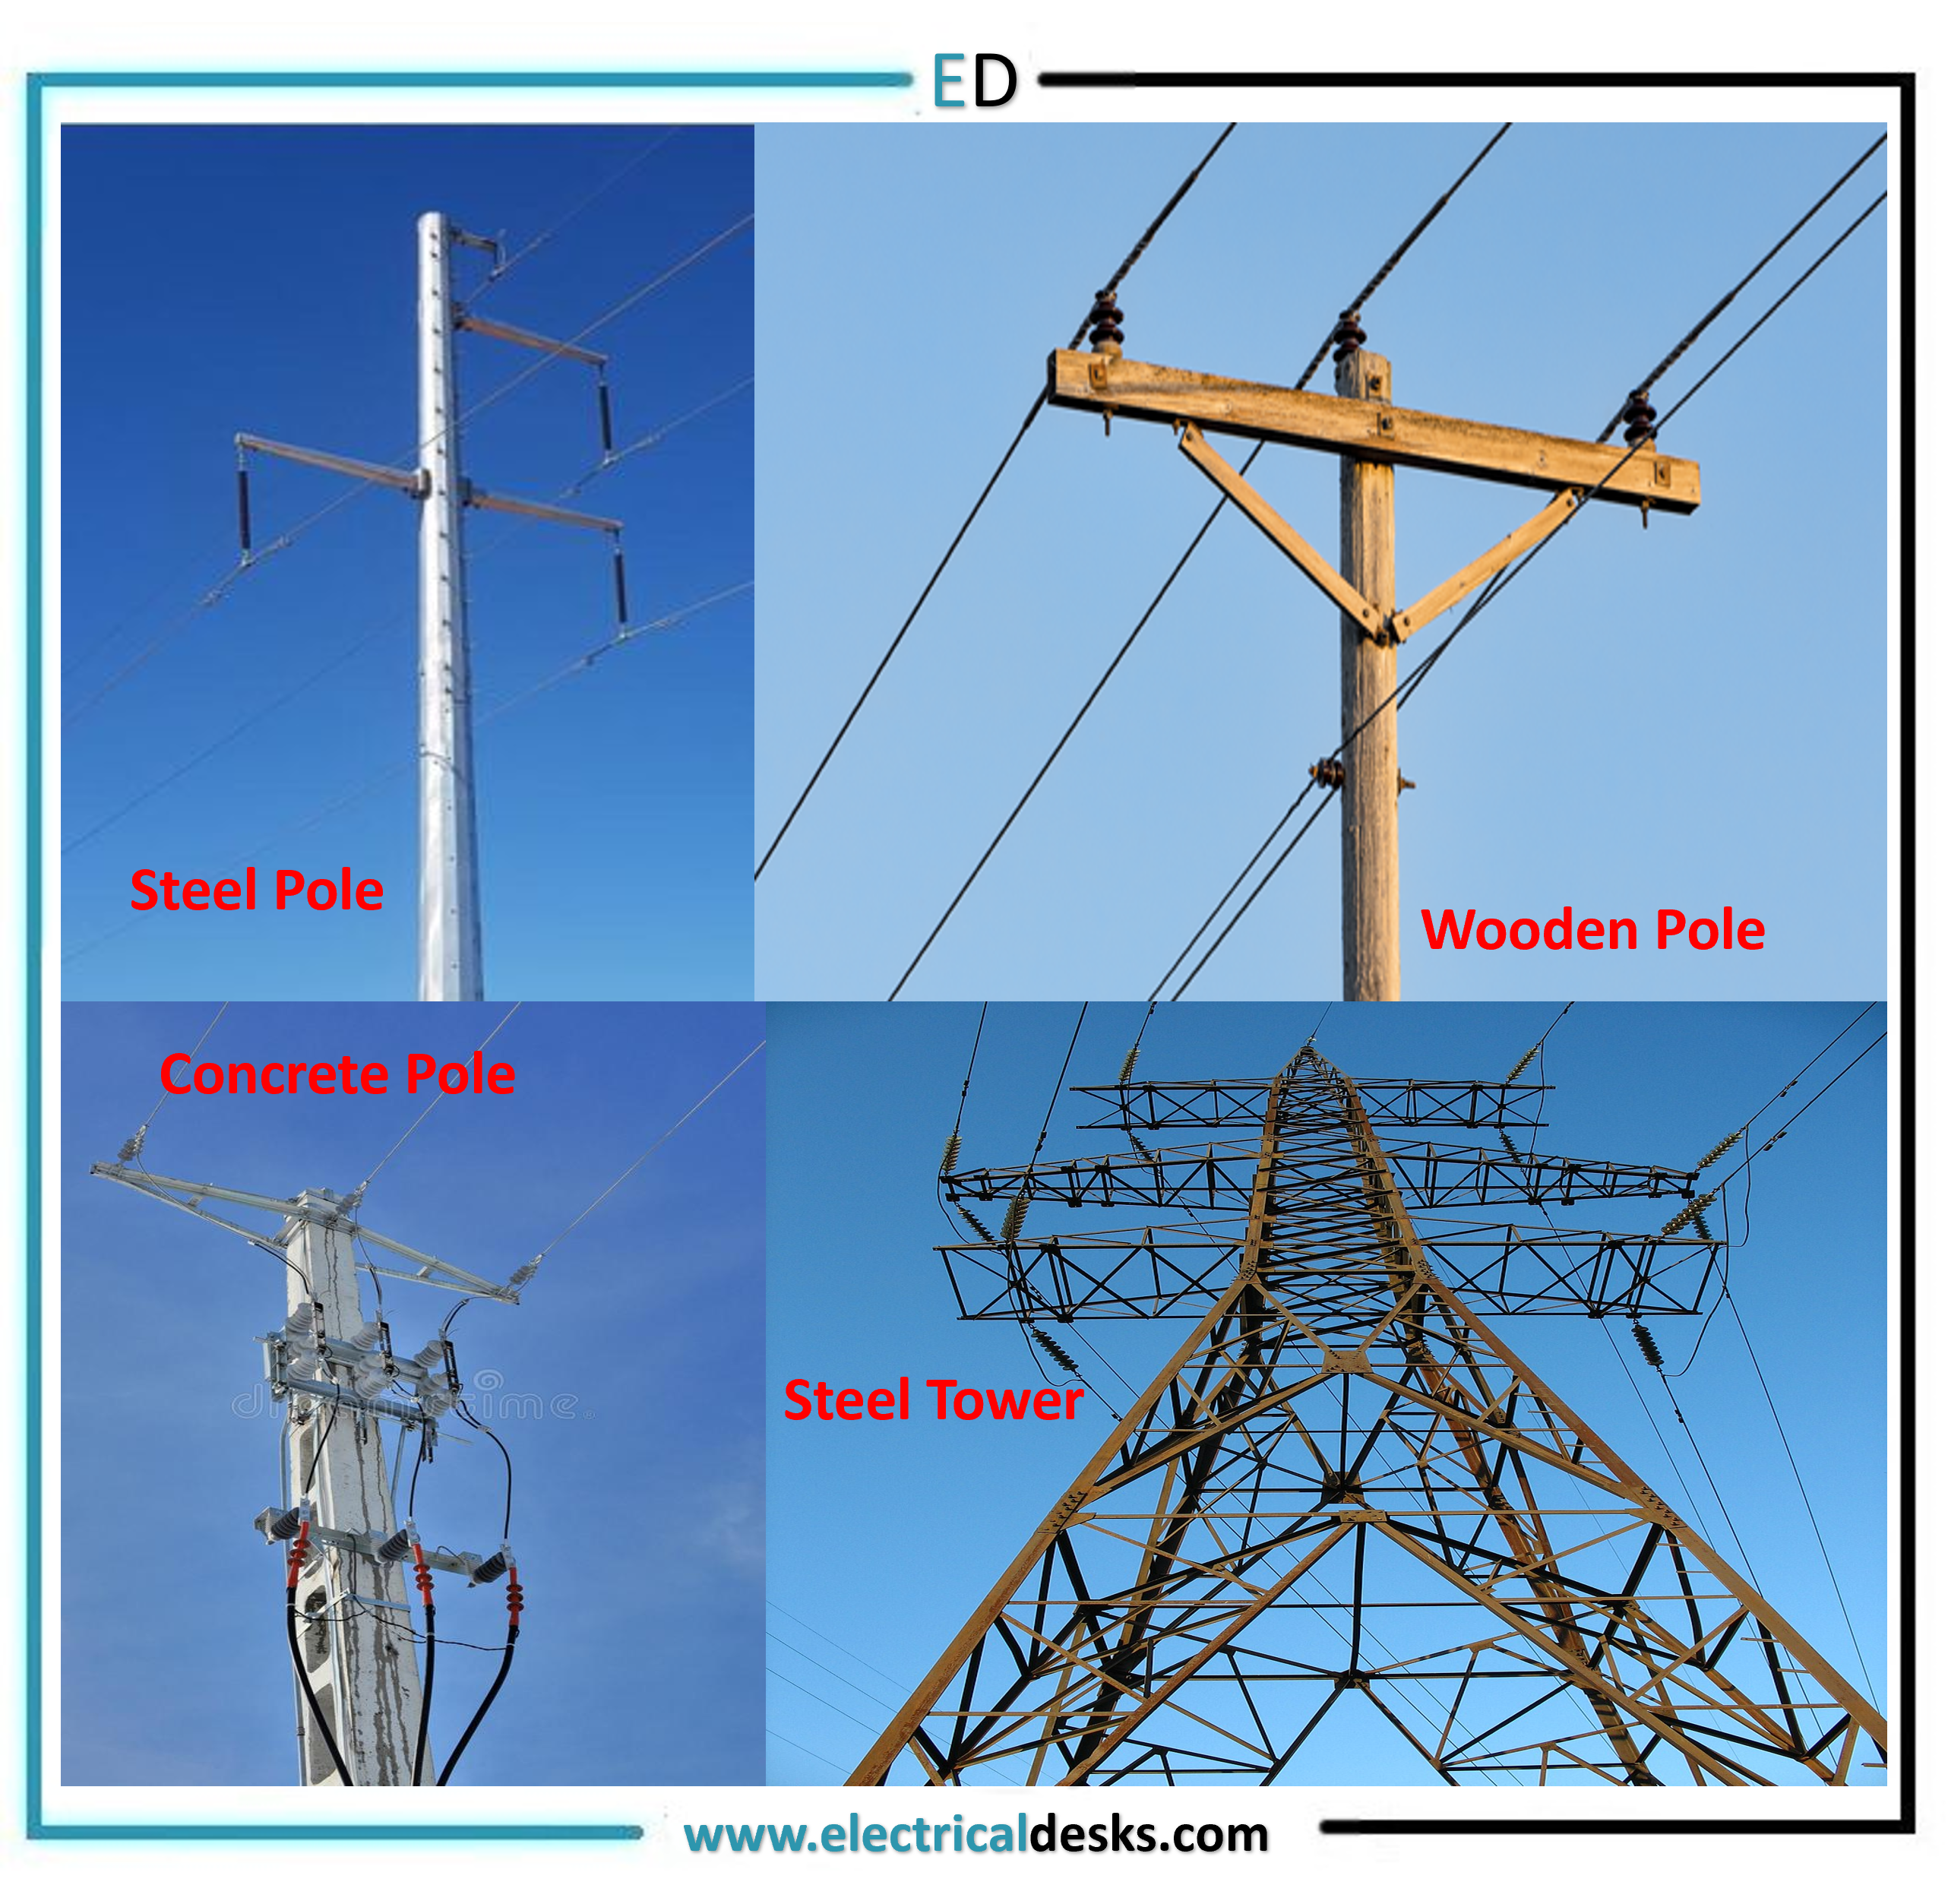 Main Components of Overhead transmission & Distribution lines